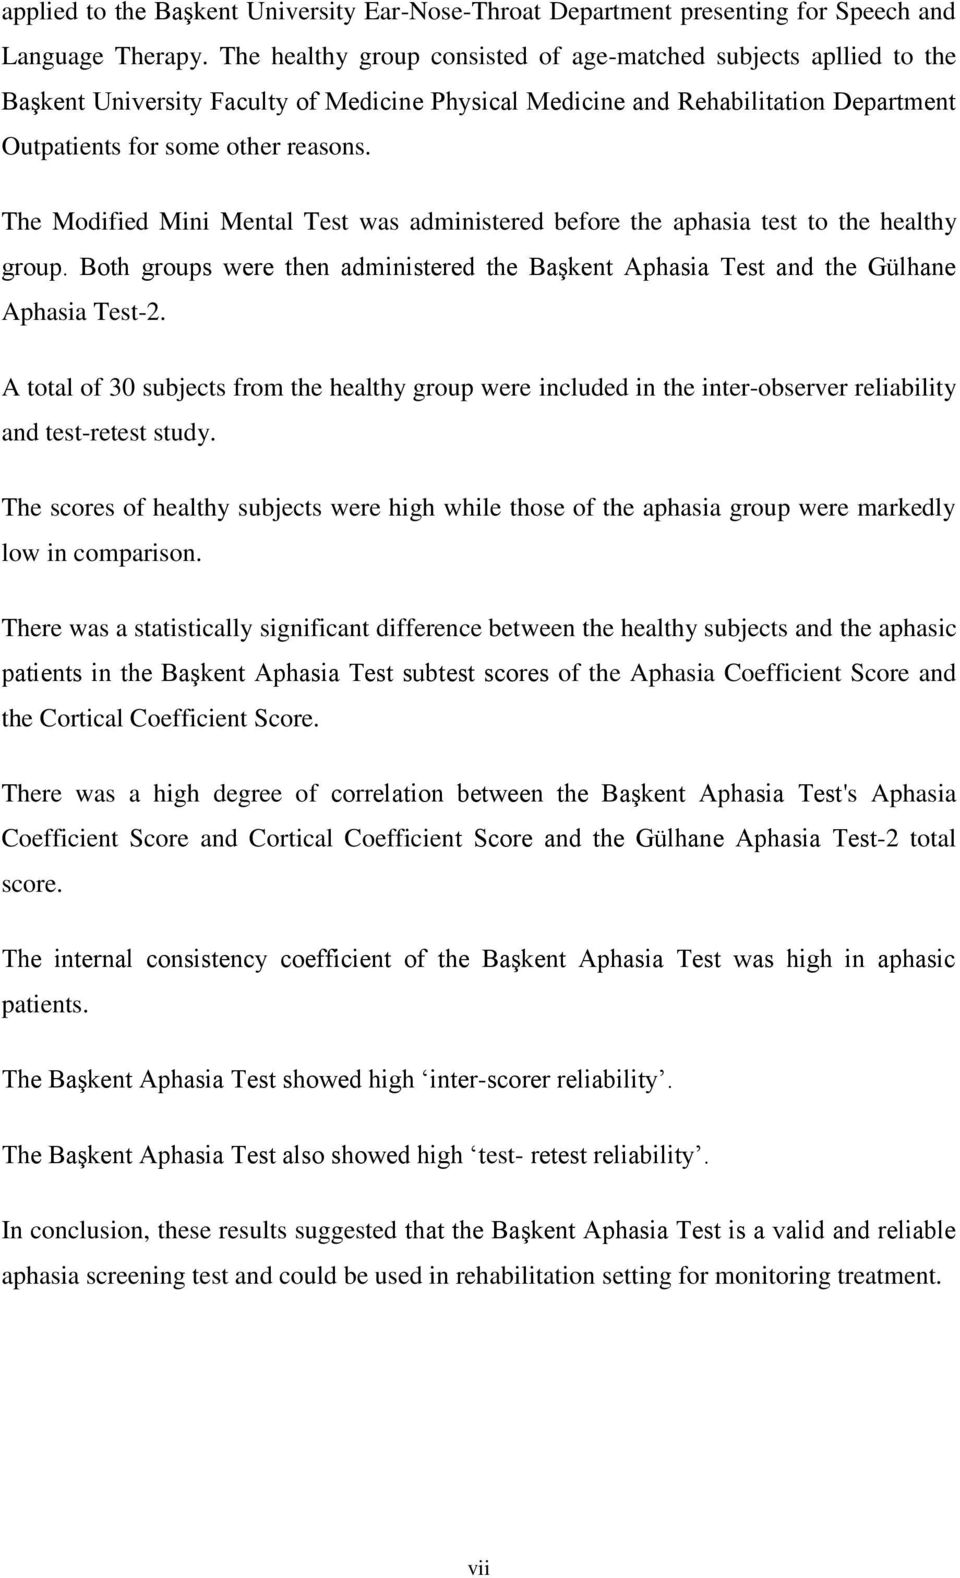 The Modified Mini Mental Test was administered before the aphasia test to the healthy group. Both groups were then administered the Başkent Aphasia Test and the Gülhane Aphasia Test-2.